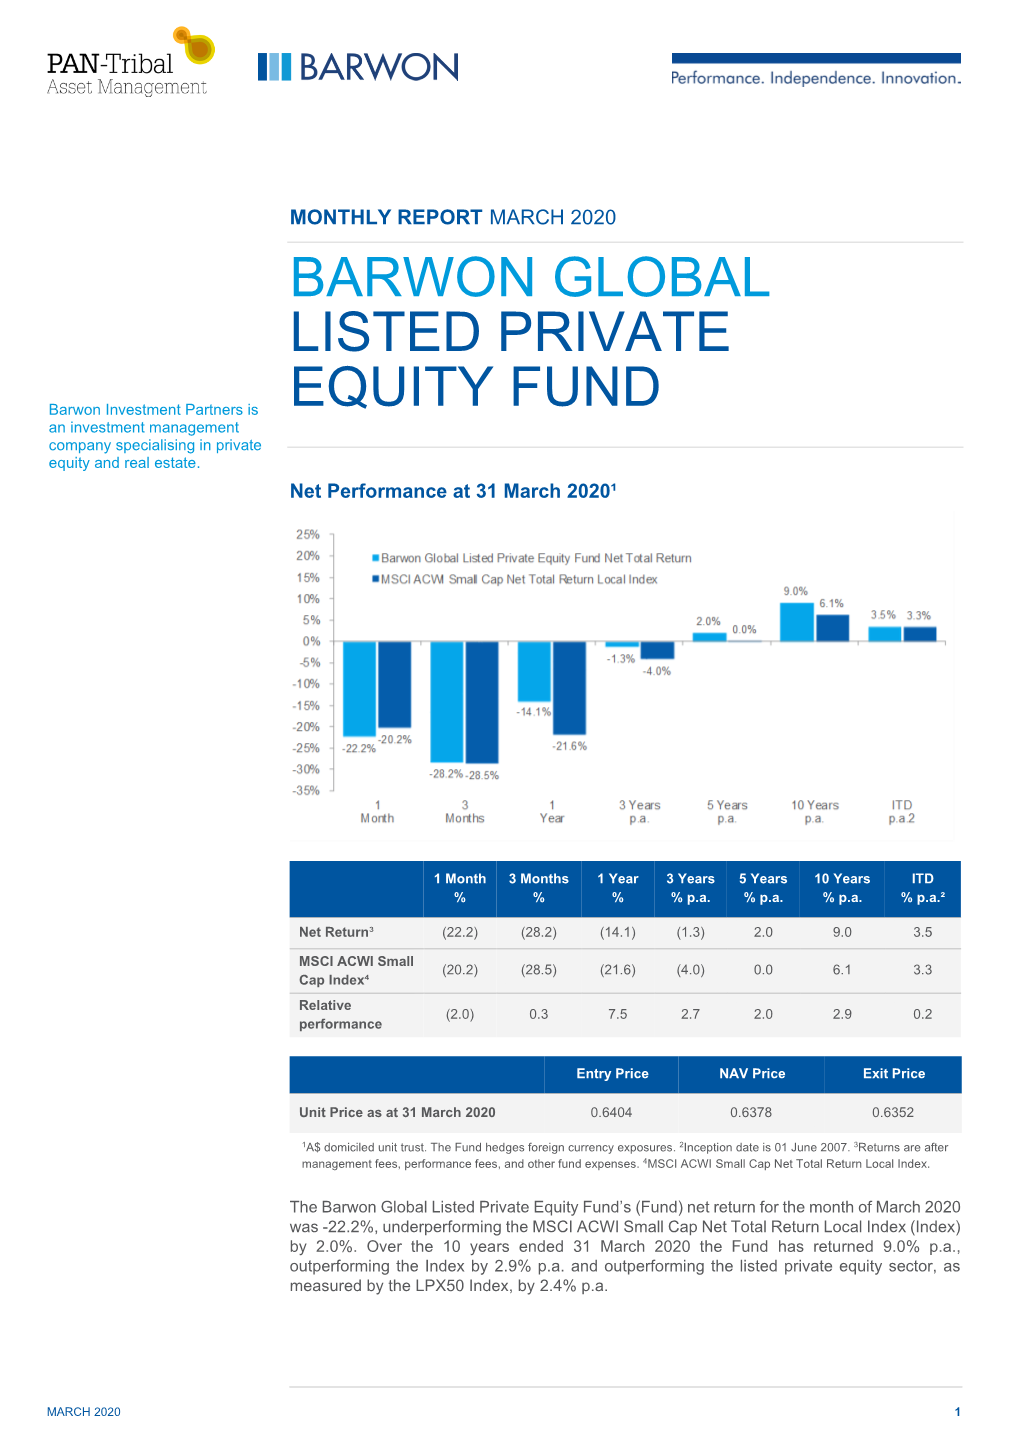 Barwon Global Listed Private Equity Fund